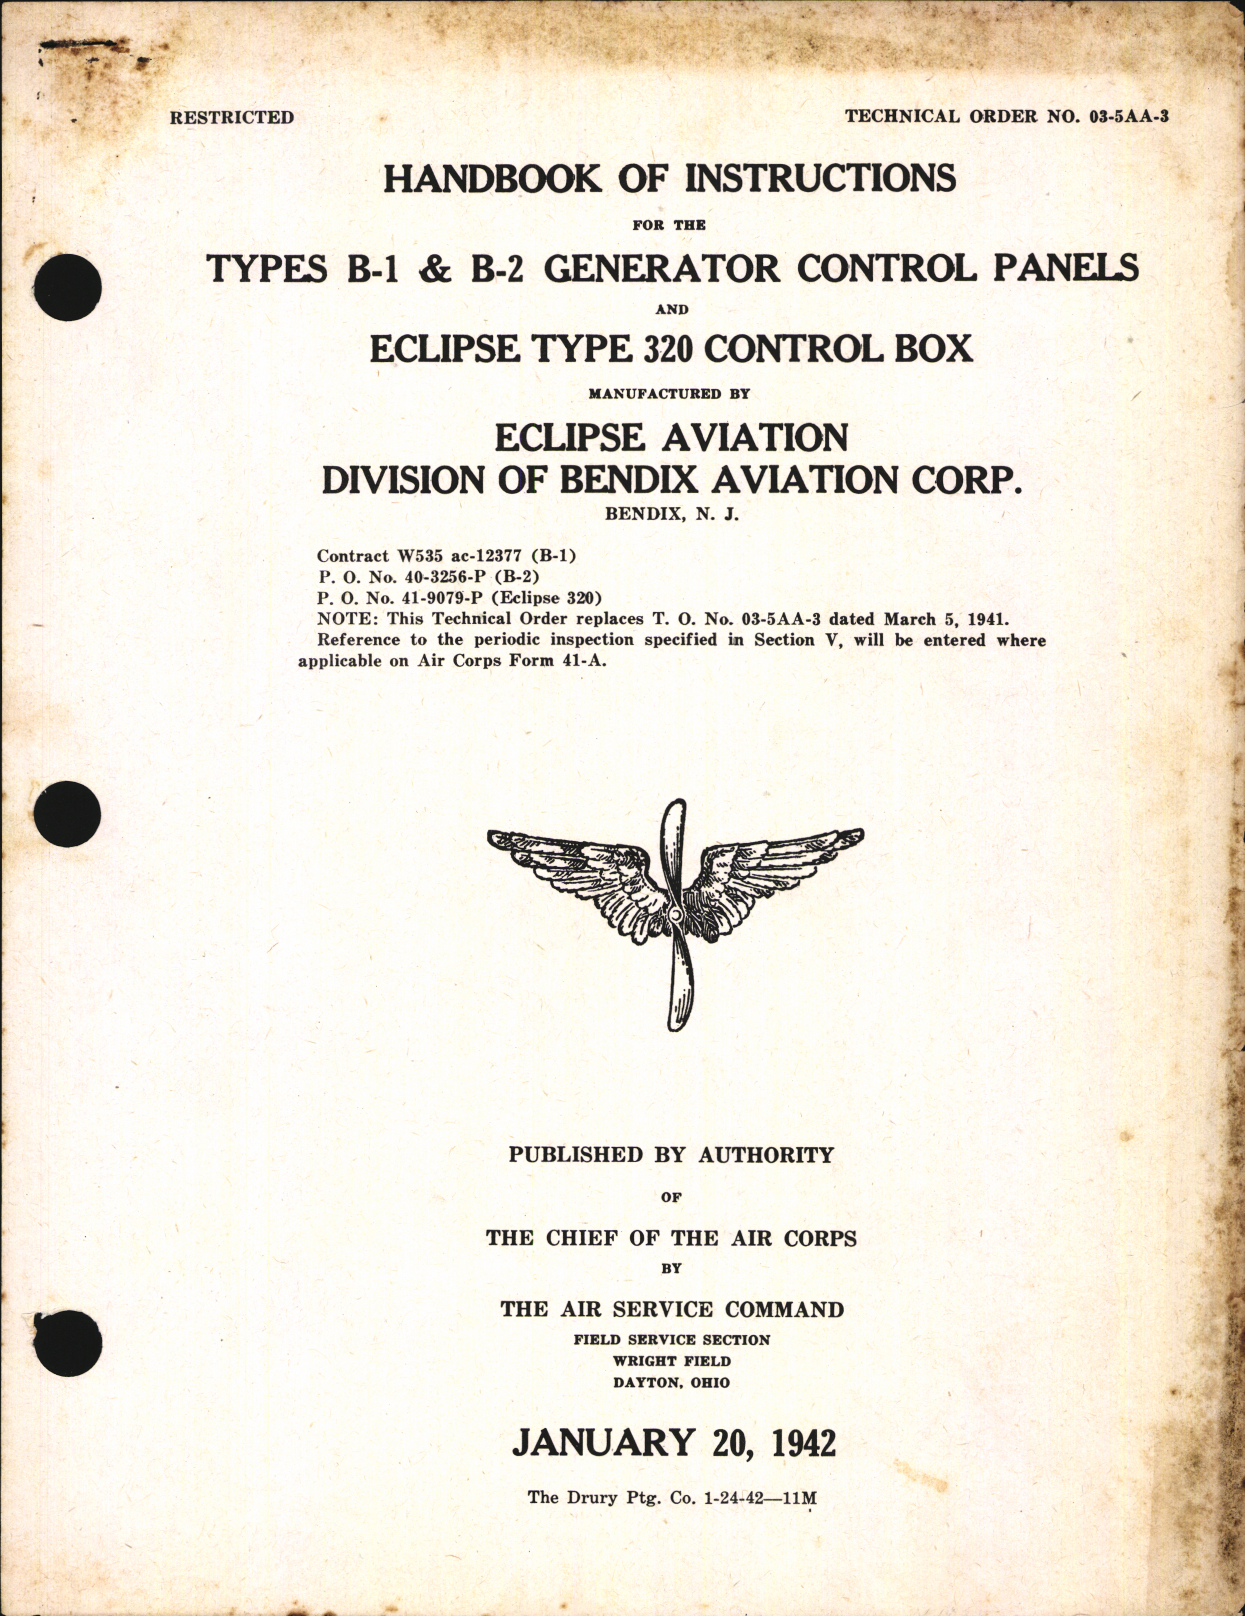 Sample page 1 from AirCorps Library document: Handbook of Instructions for Types B-1 and B-2 Generator Control Panels and Type 320 Control Box